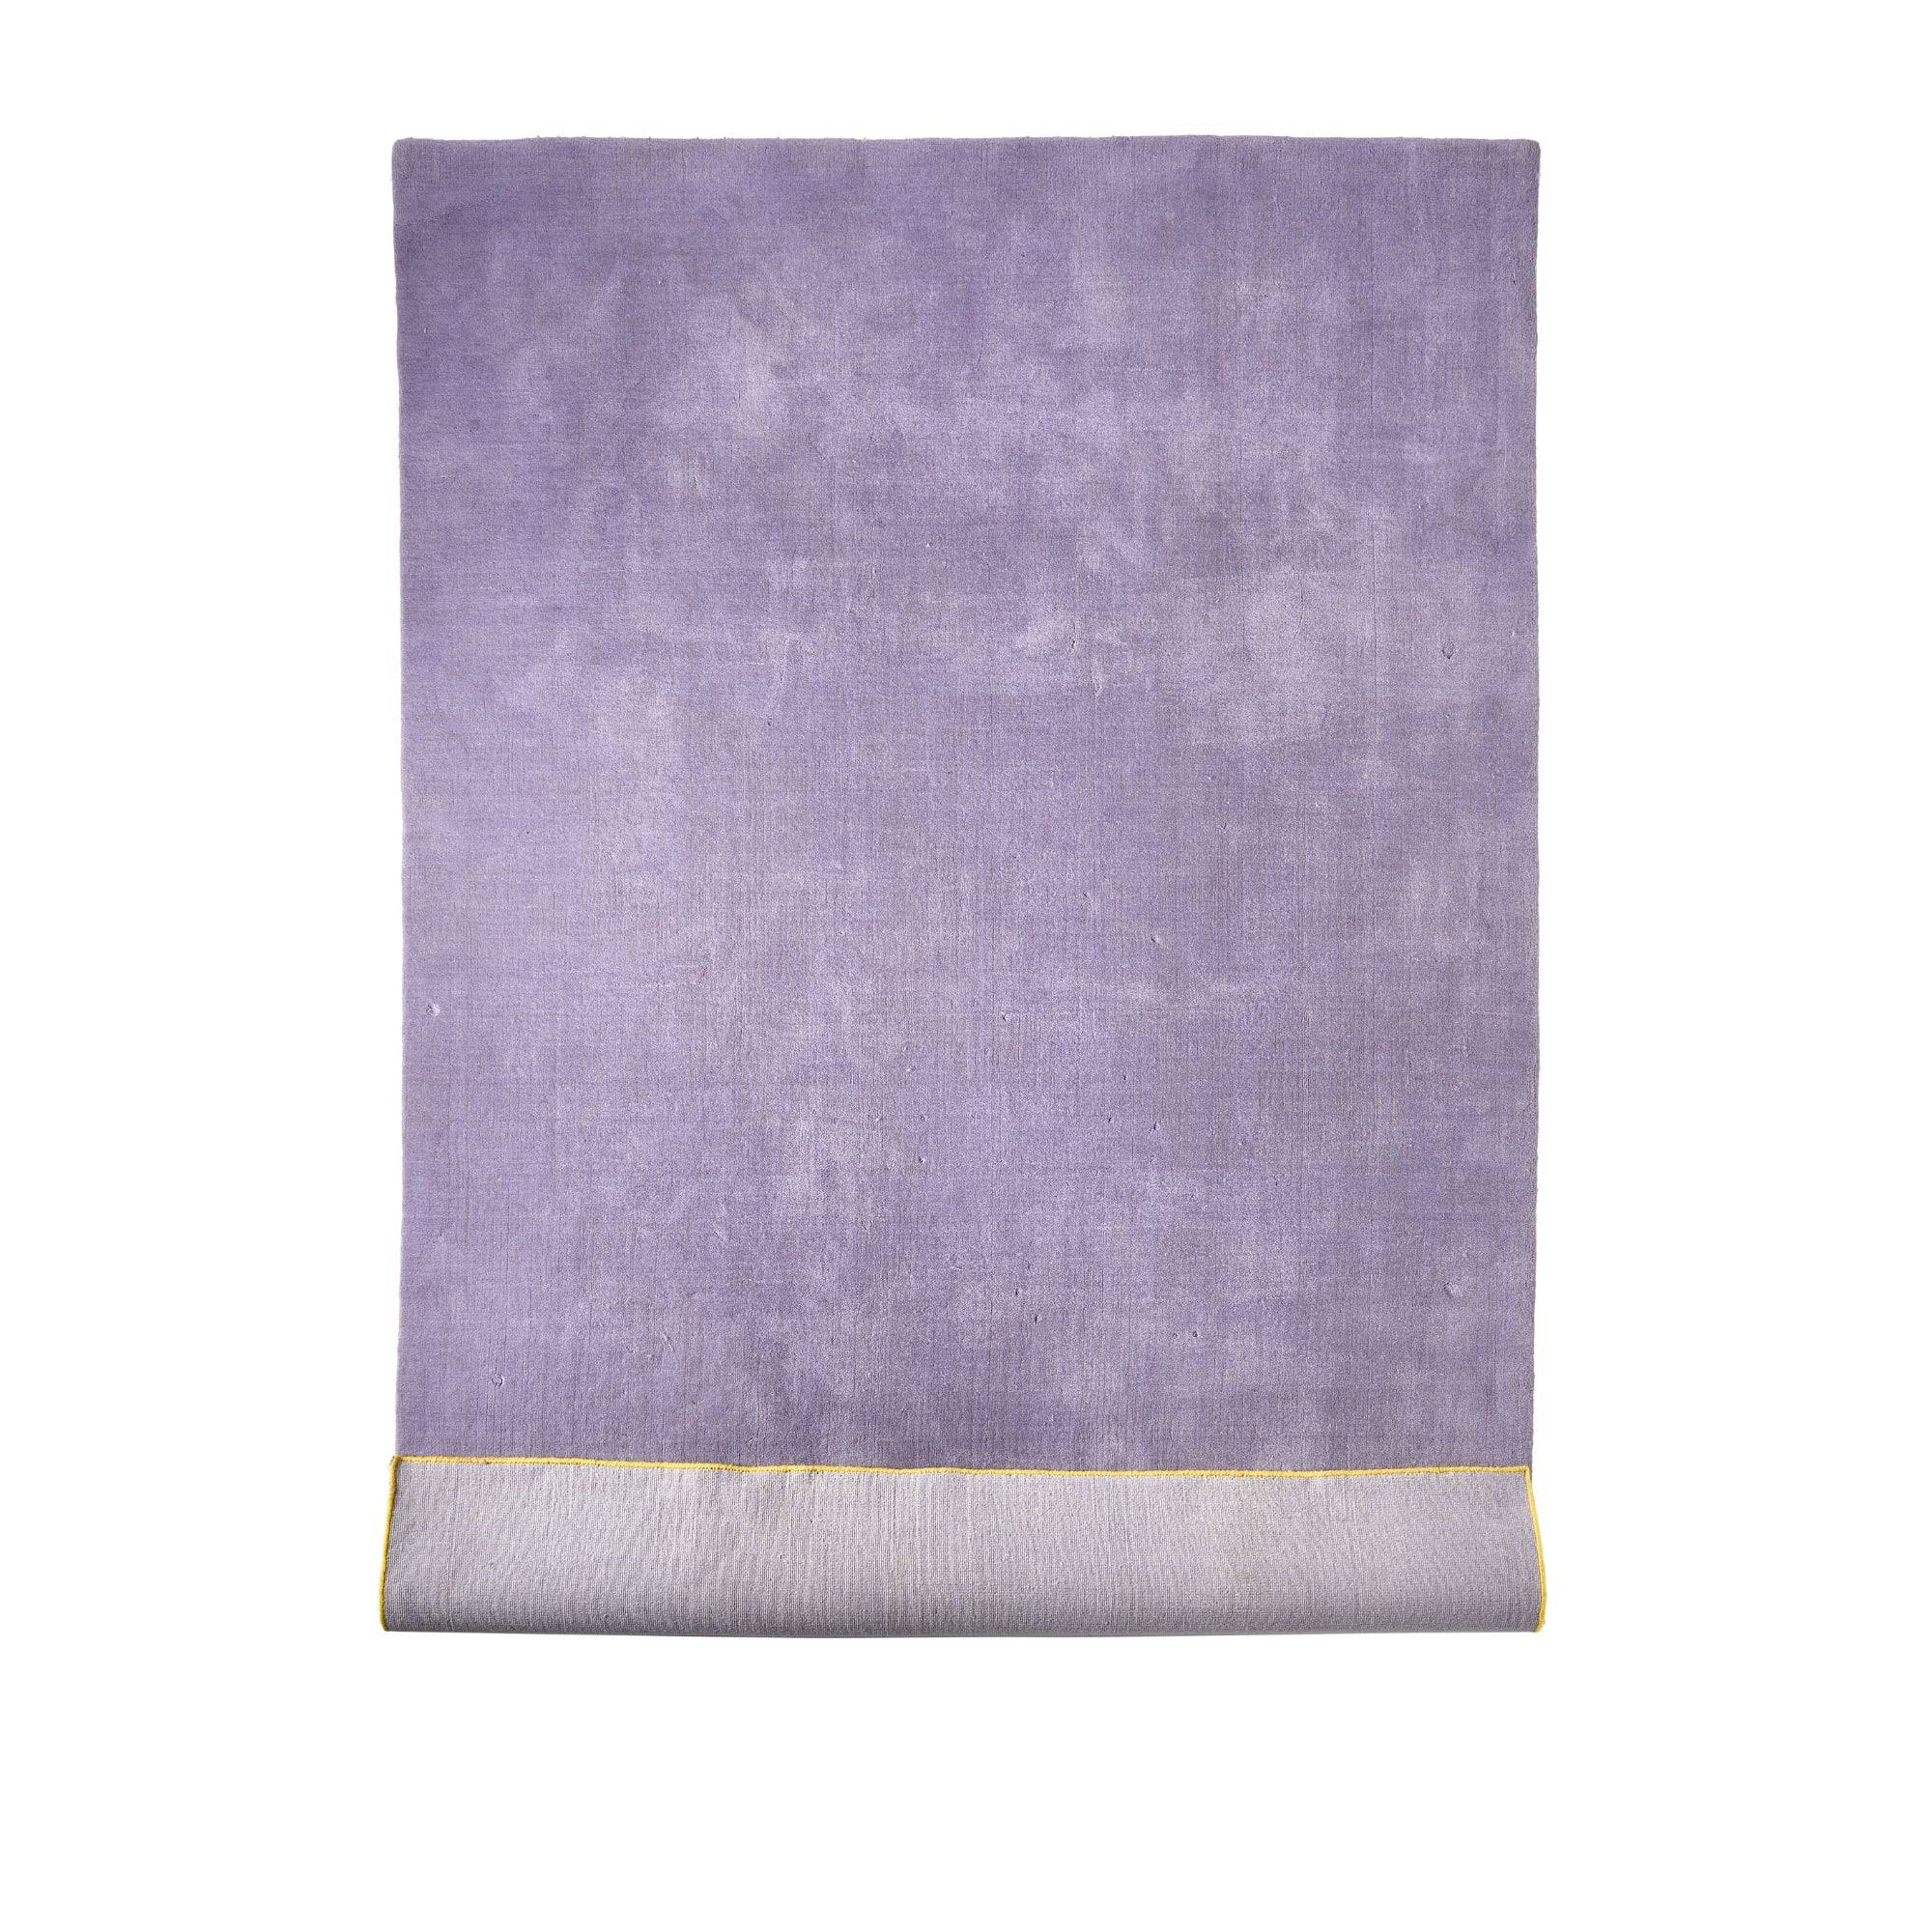 Outline Rug - Lilac - THAT COOL LIVING